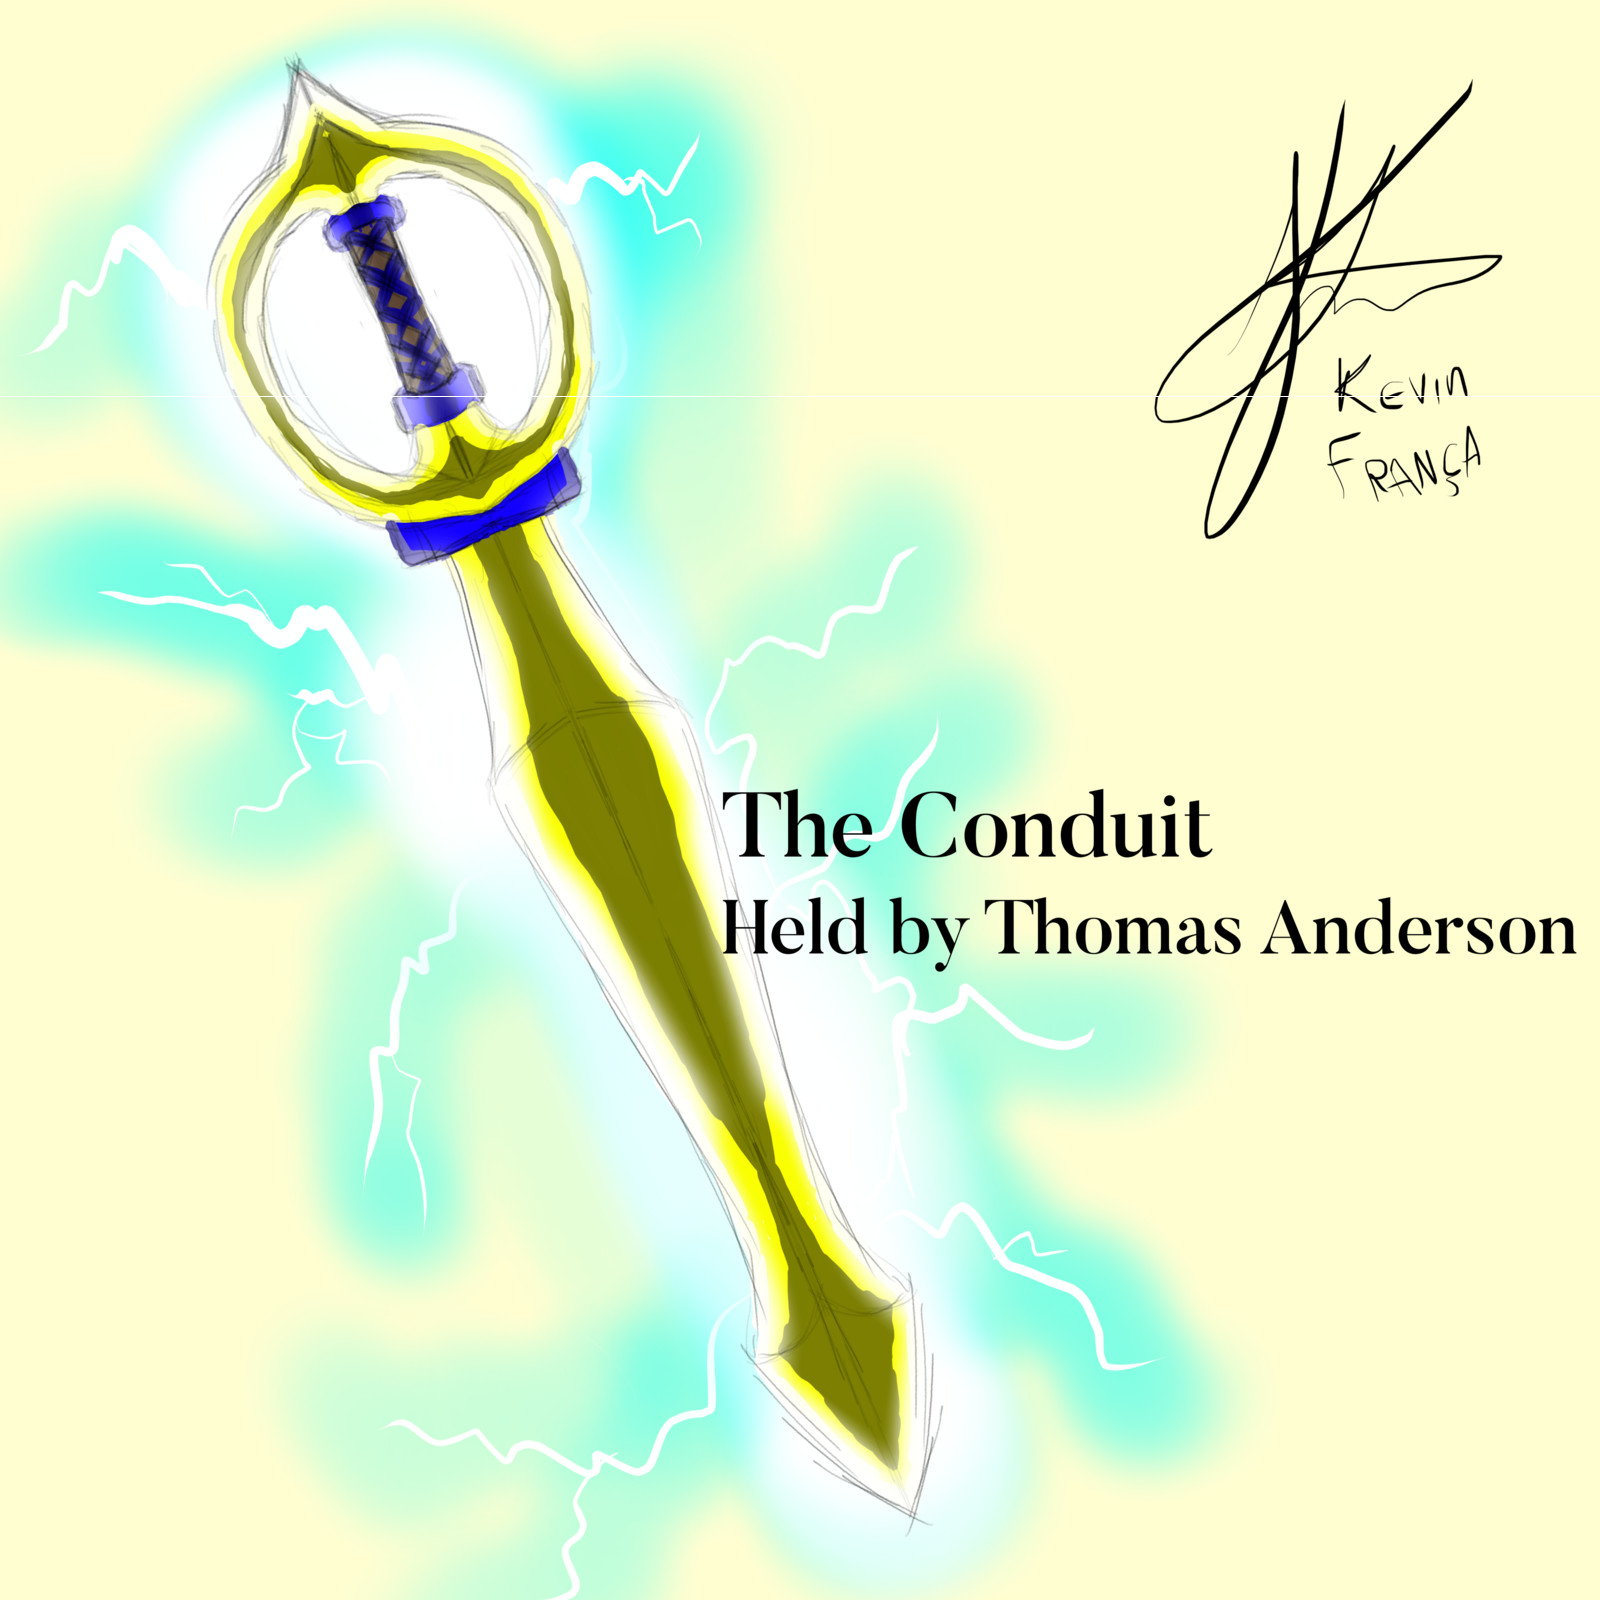 The Conduit - Held by Thomas Anderson.
Thomas is the village researcher, once found under massive attacks from bandits, he researched for a effective way to defend himself, forging this heavy, golden and deadly weapon.